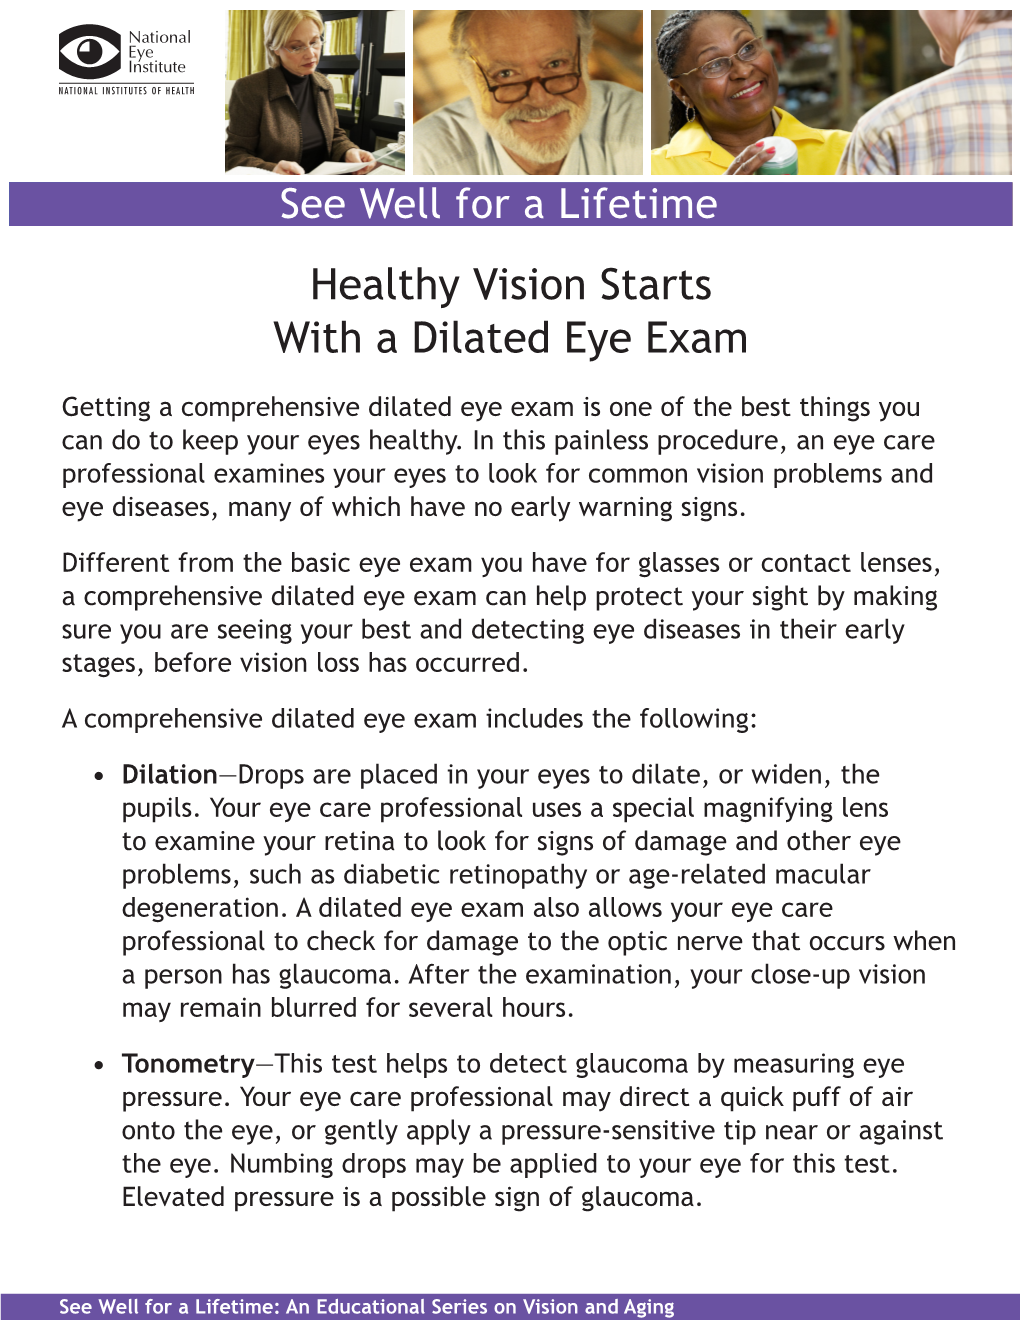 Healthy Vision Starts with a Dilated Eye Exam